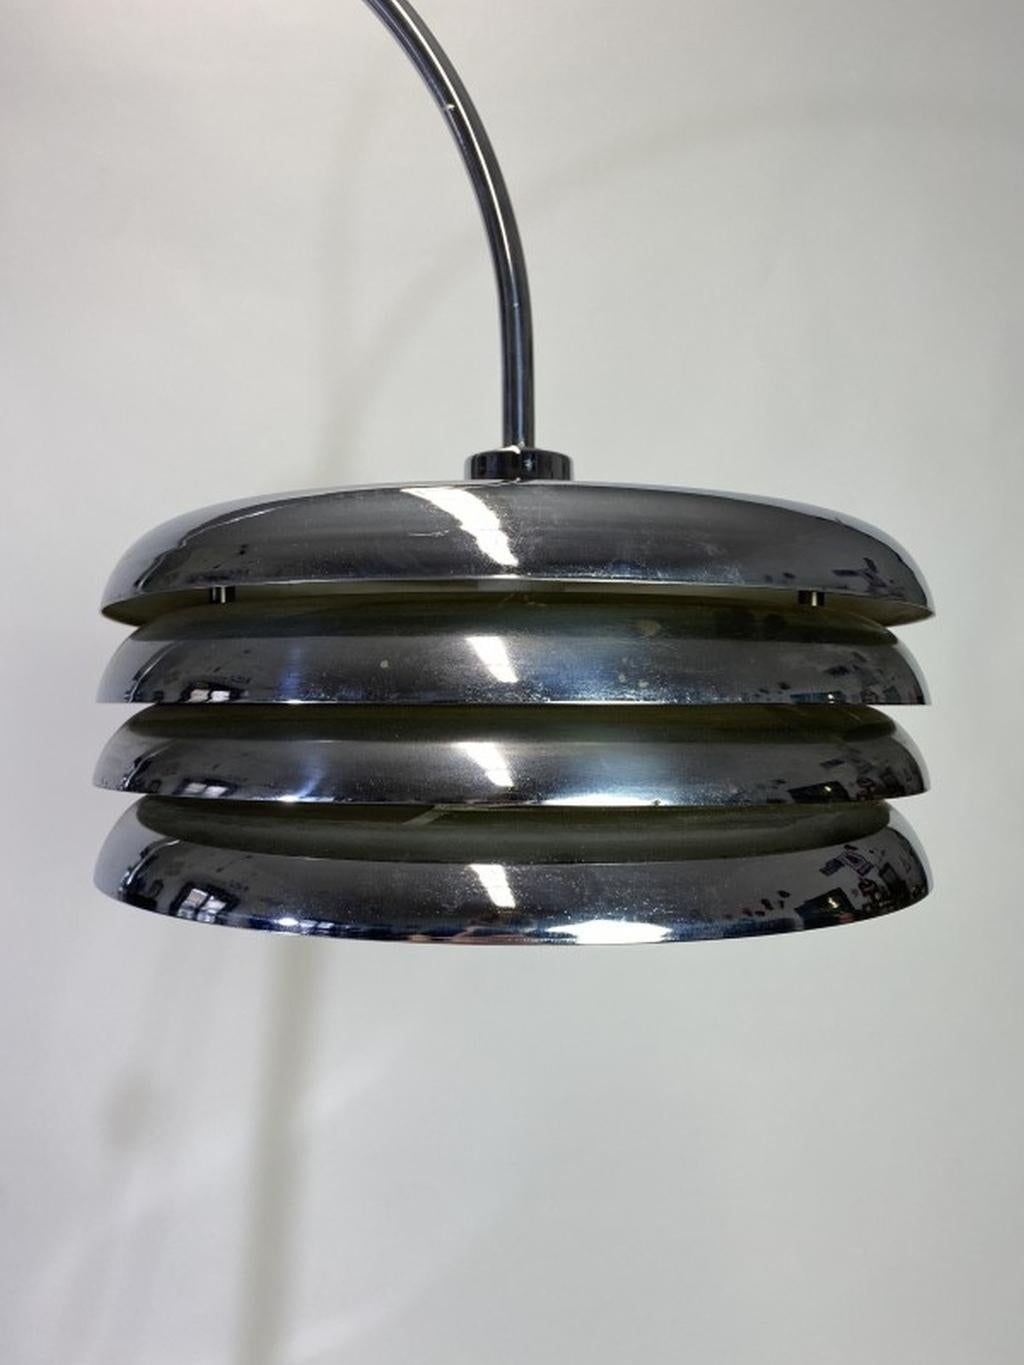 Mid-Century Modern Chrome Floor Lamp by Tamás Borsfay for Hungarian Craftsmanship Company, 1970s For Sale